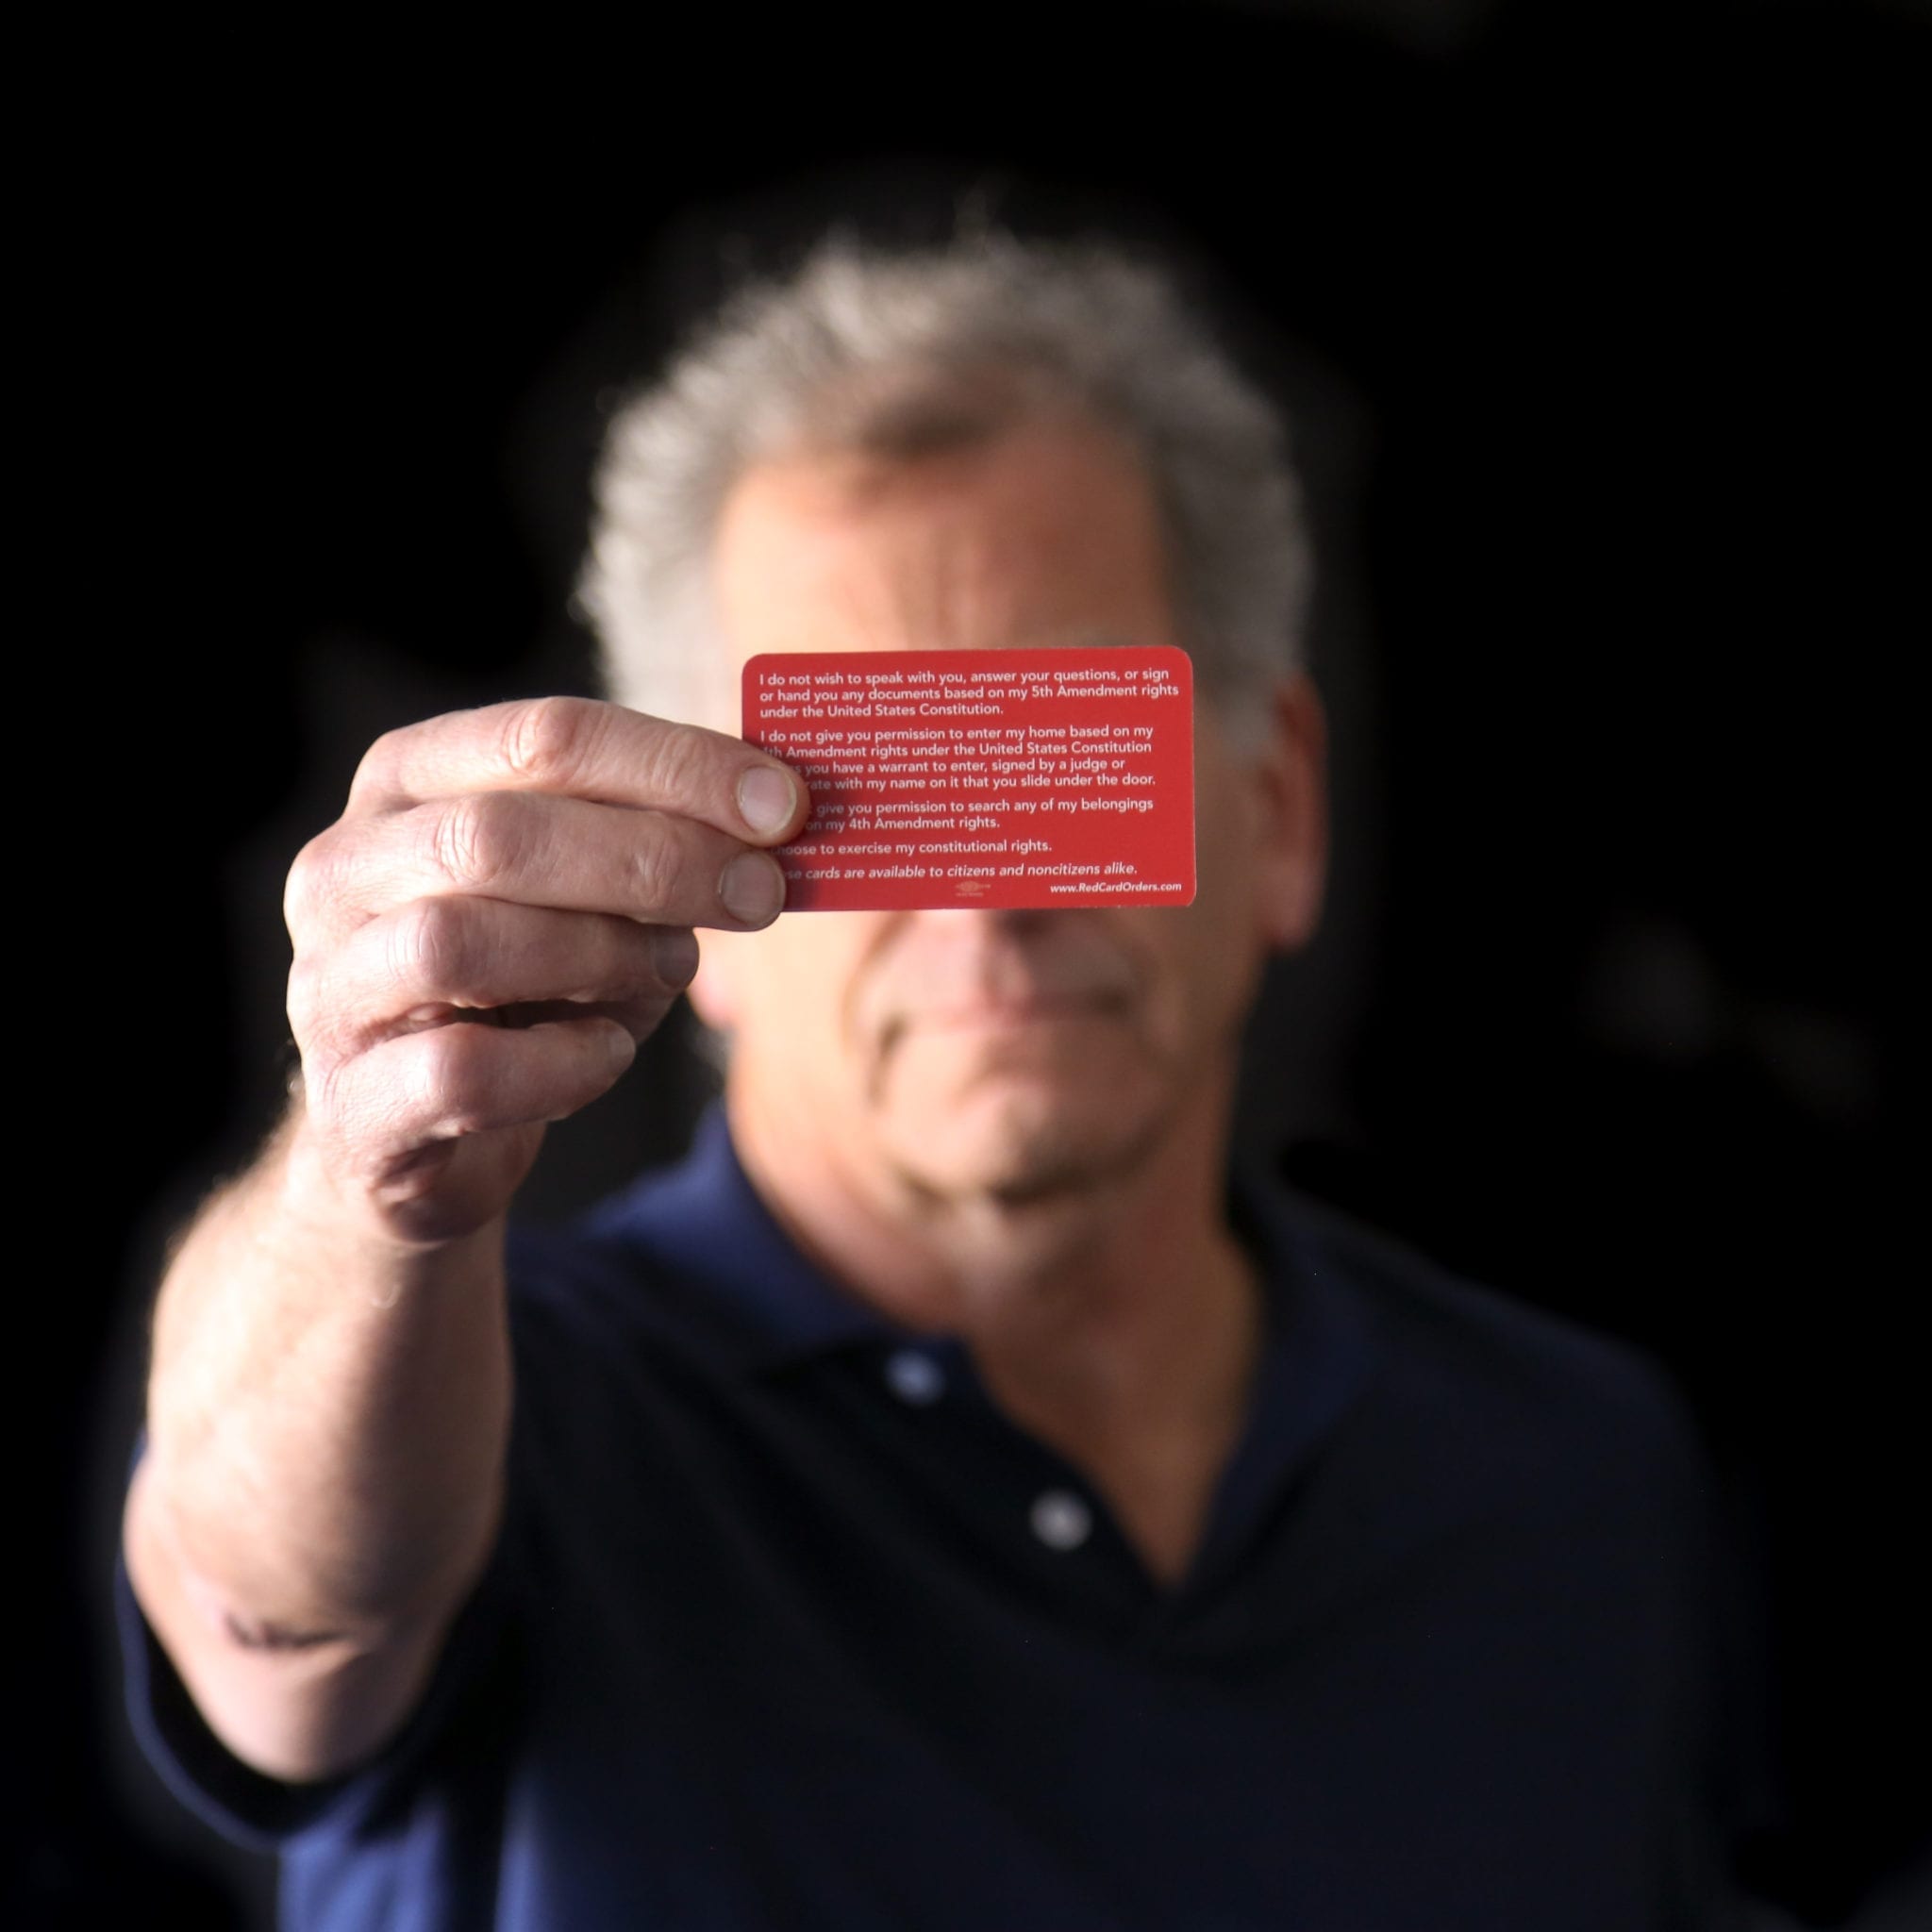 A man holding holding a know-your-rights red card